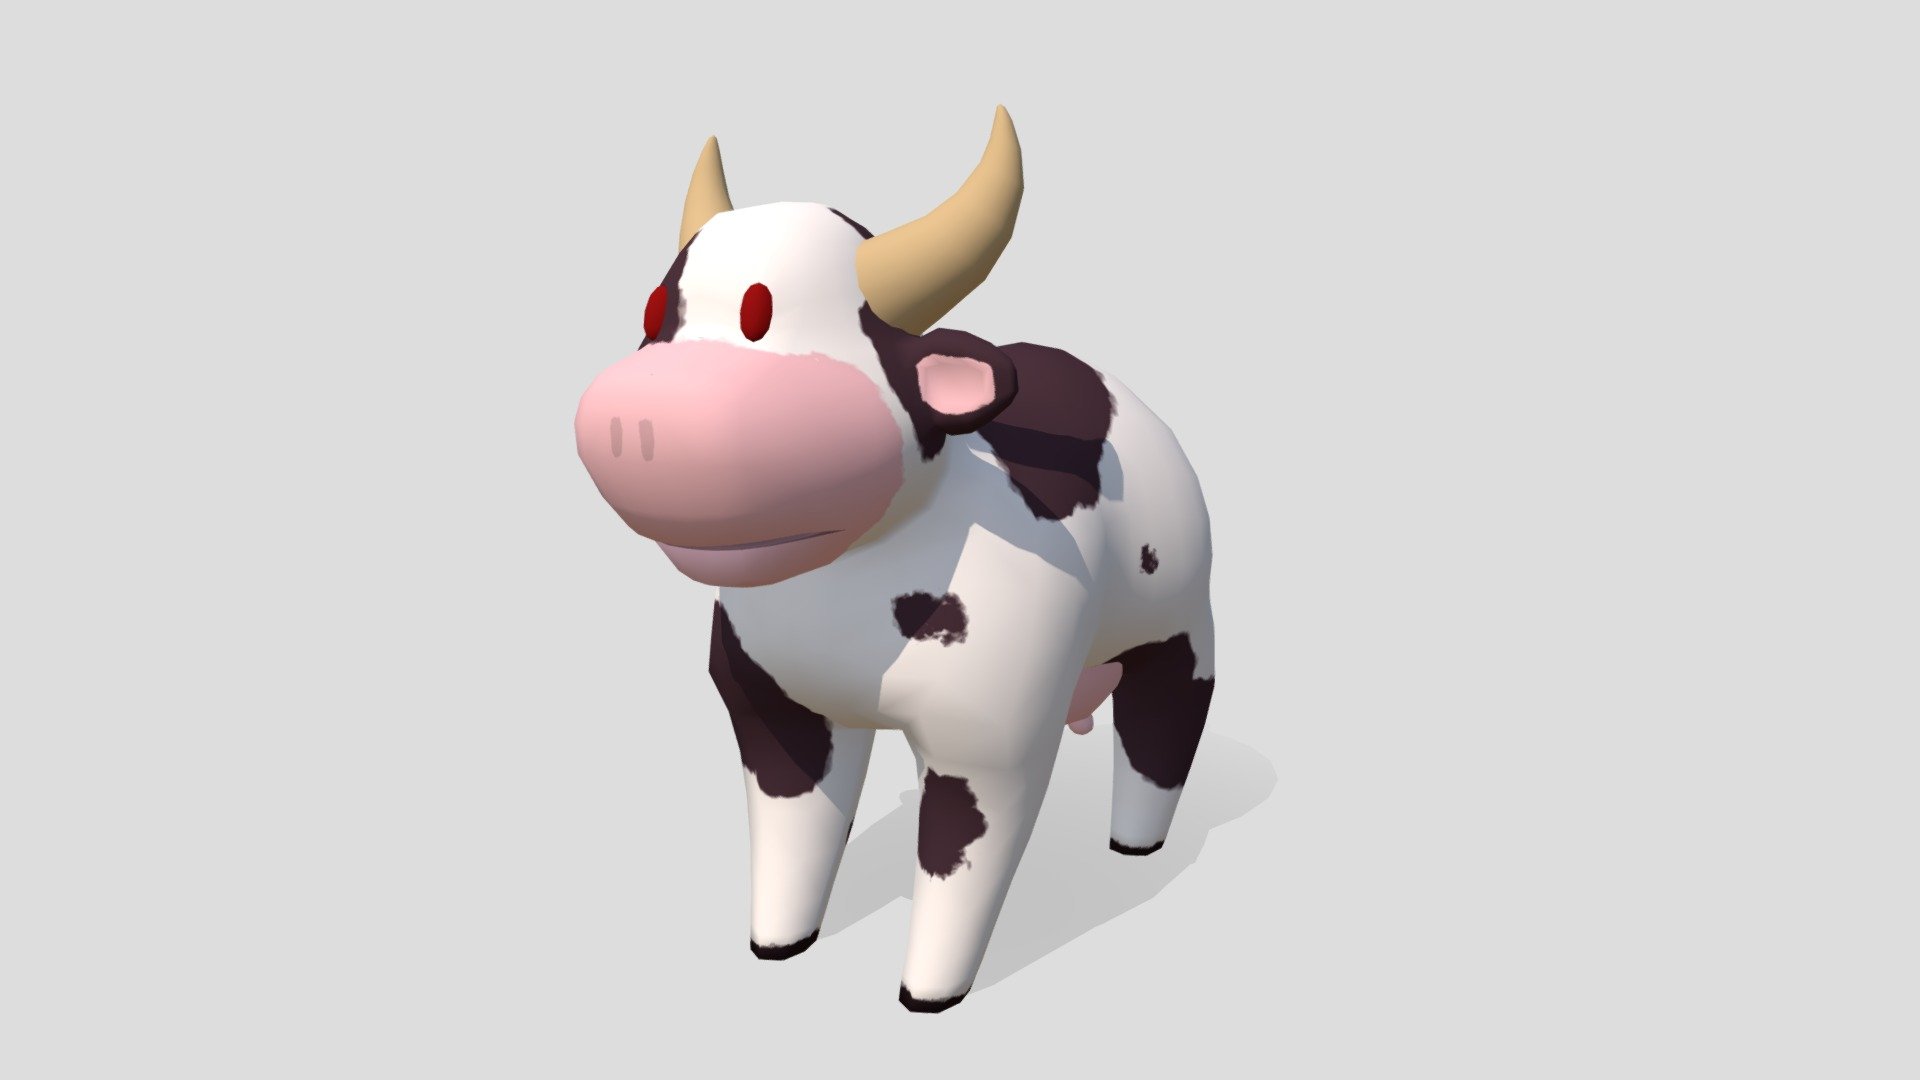 This is the cow model for the game Cow-Duction, a game developed for my Game Development Workshop course 3d model